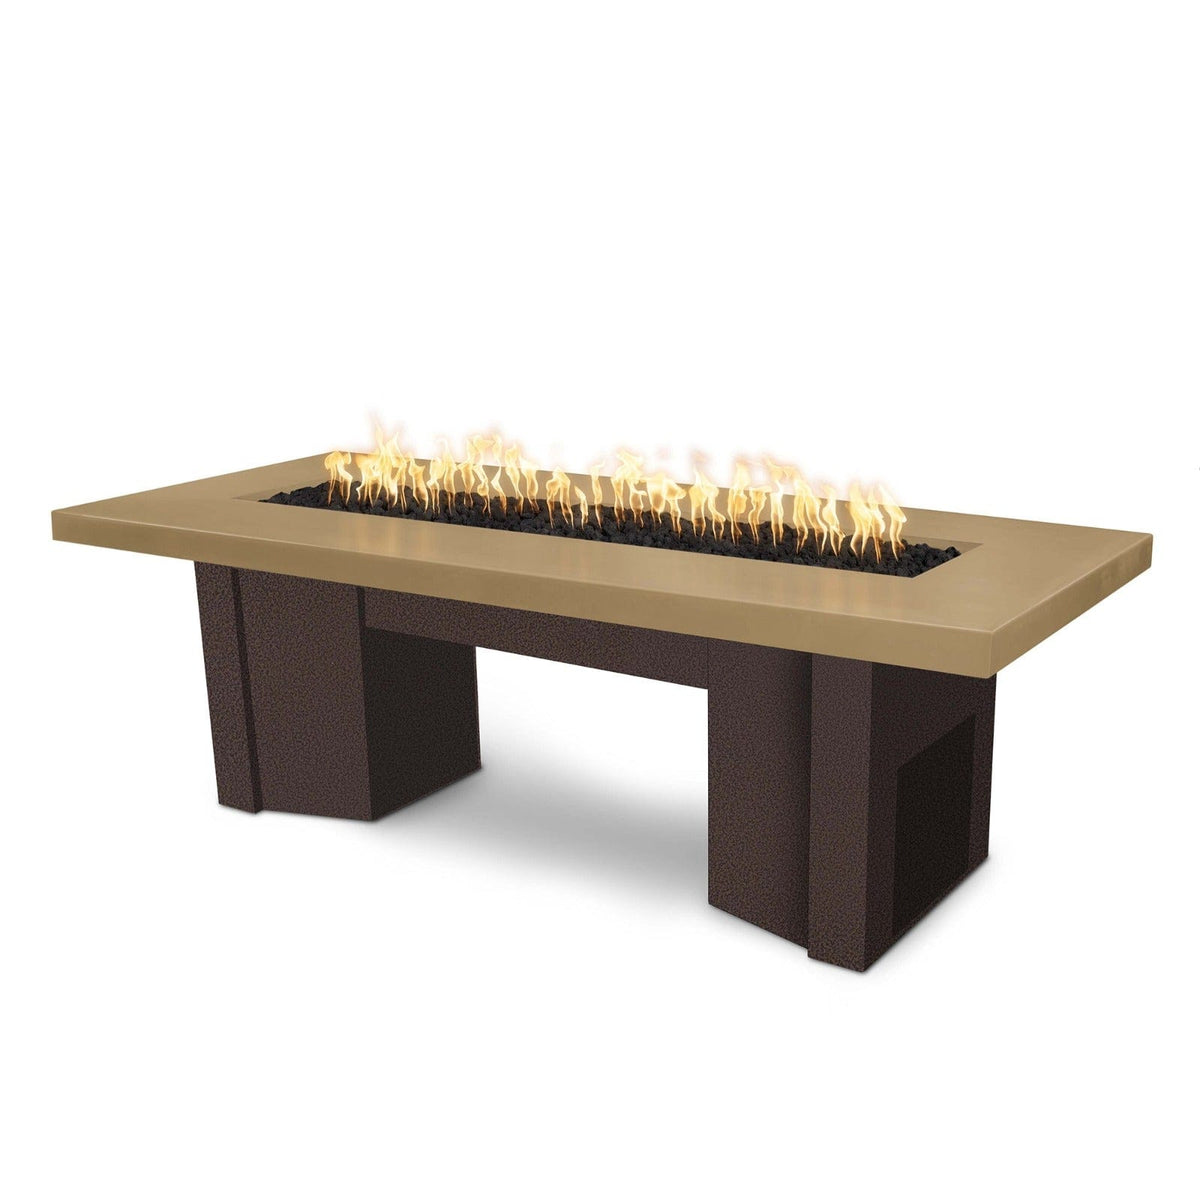 The Outdoor Plus Fire Features Brown (-BRN) / Copper Vein Powder Coated Steel (-CPV) The Outdoor Plus 78&quot; Alameda Fire Table Smooth Concrete in Natural Gas - 110V Plug &amp; Play Electronic Ignition / OPT-ALMGFRC78EKIT-NG